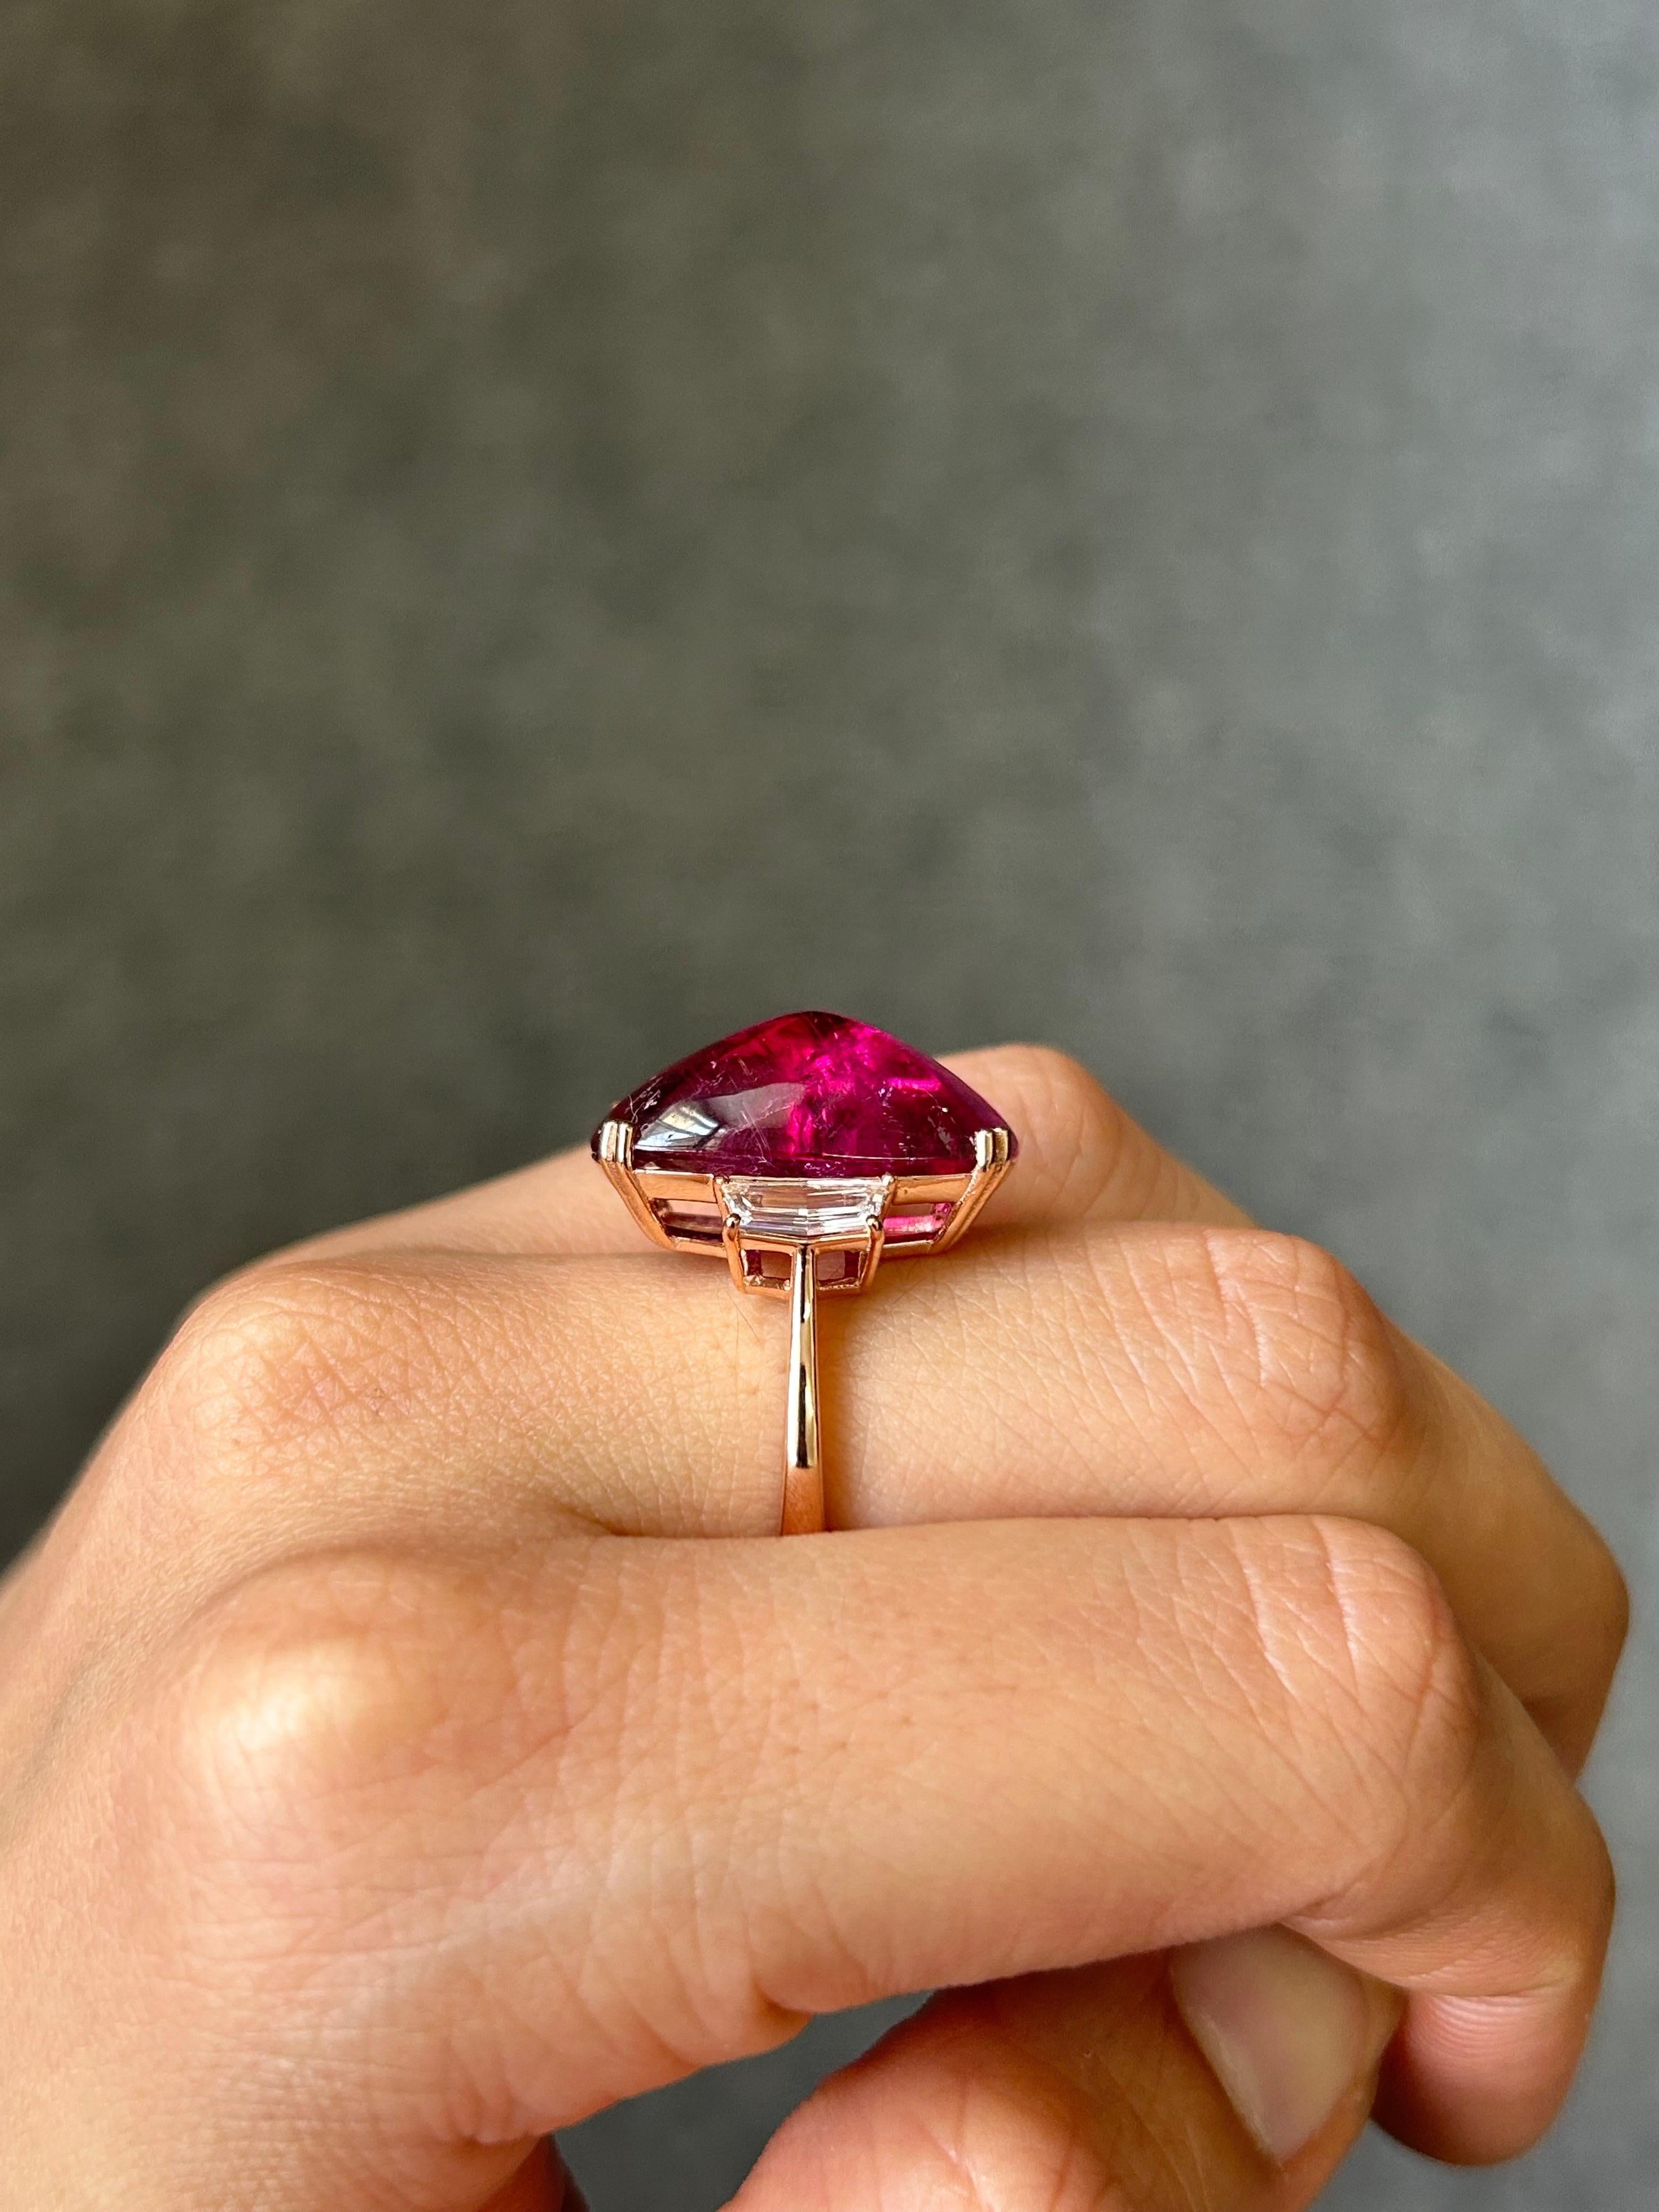 Make a statement with this unique and beautiful pink, sugarloaf shaped rubelite tourmaline and diamond three stone cocktail ring. The center stone is a certified startling pink colored natural tourmaline, weighing 16.25 carats, and the side stones